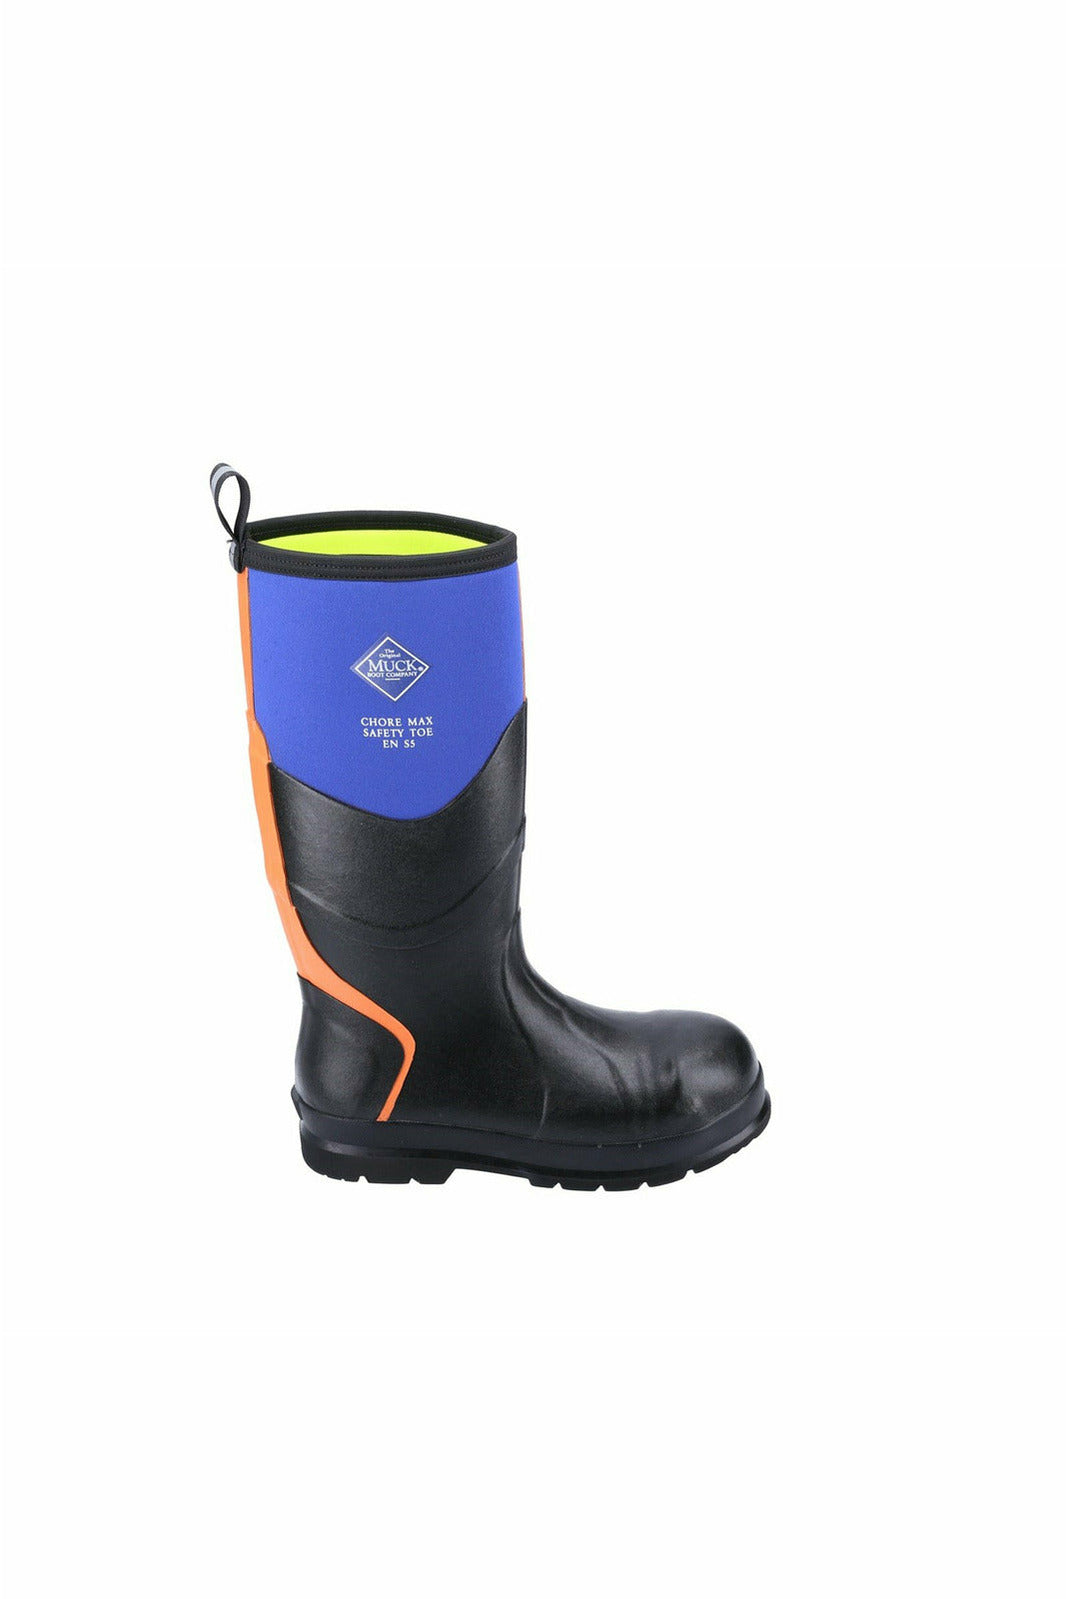 Muck Boots - Chore Max S5 Safety Wellington Mens/ladies